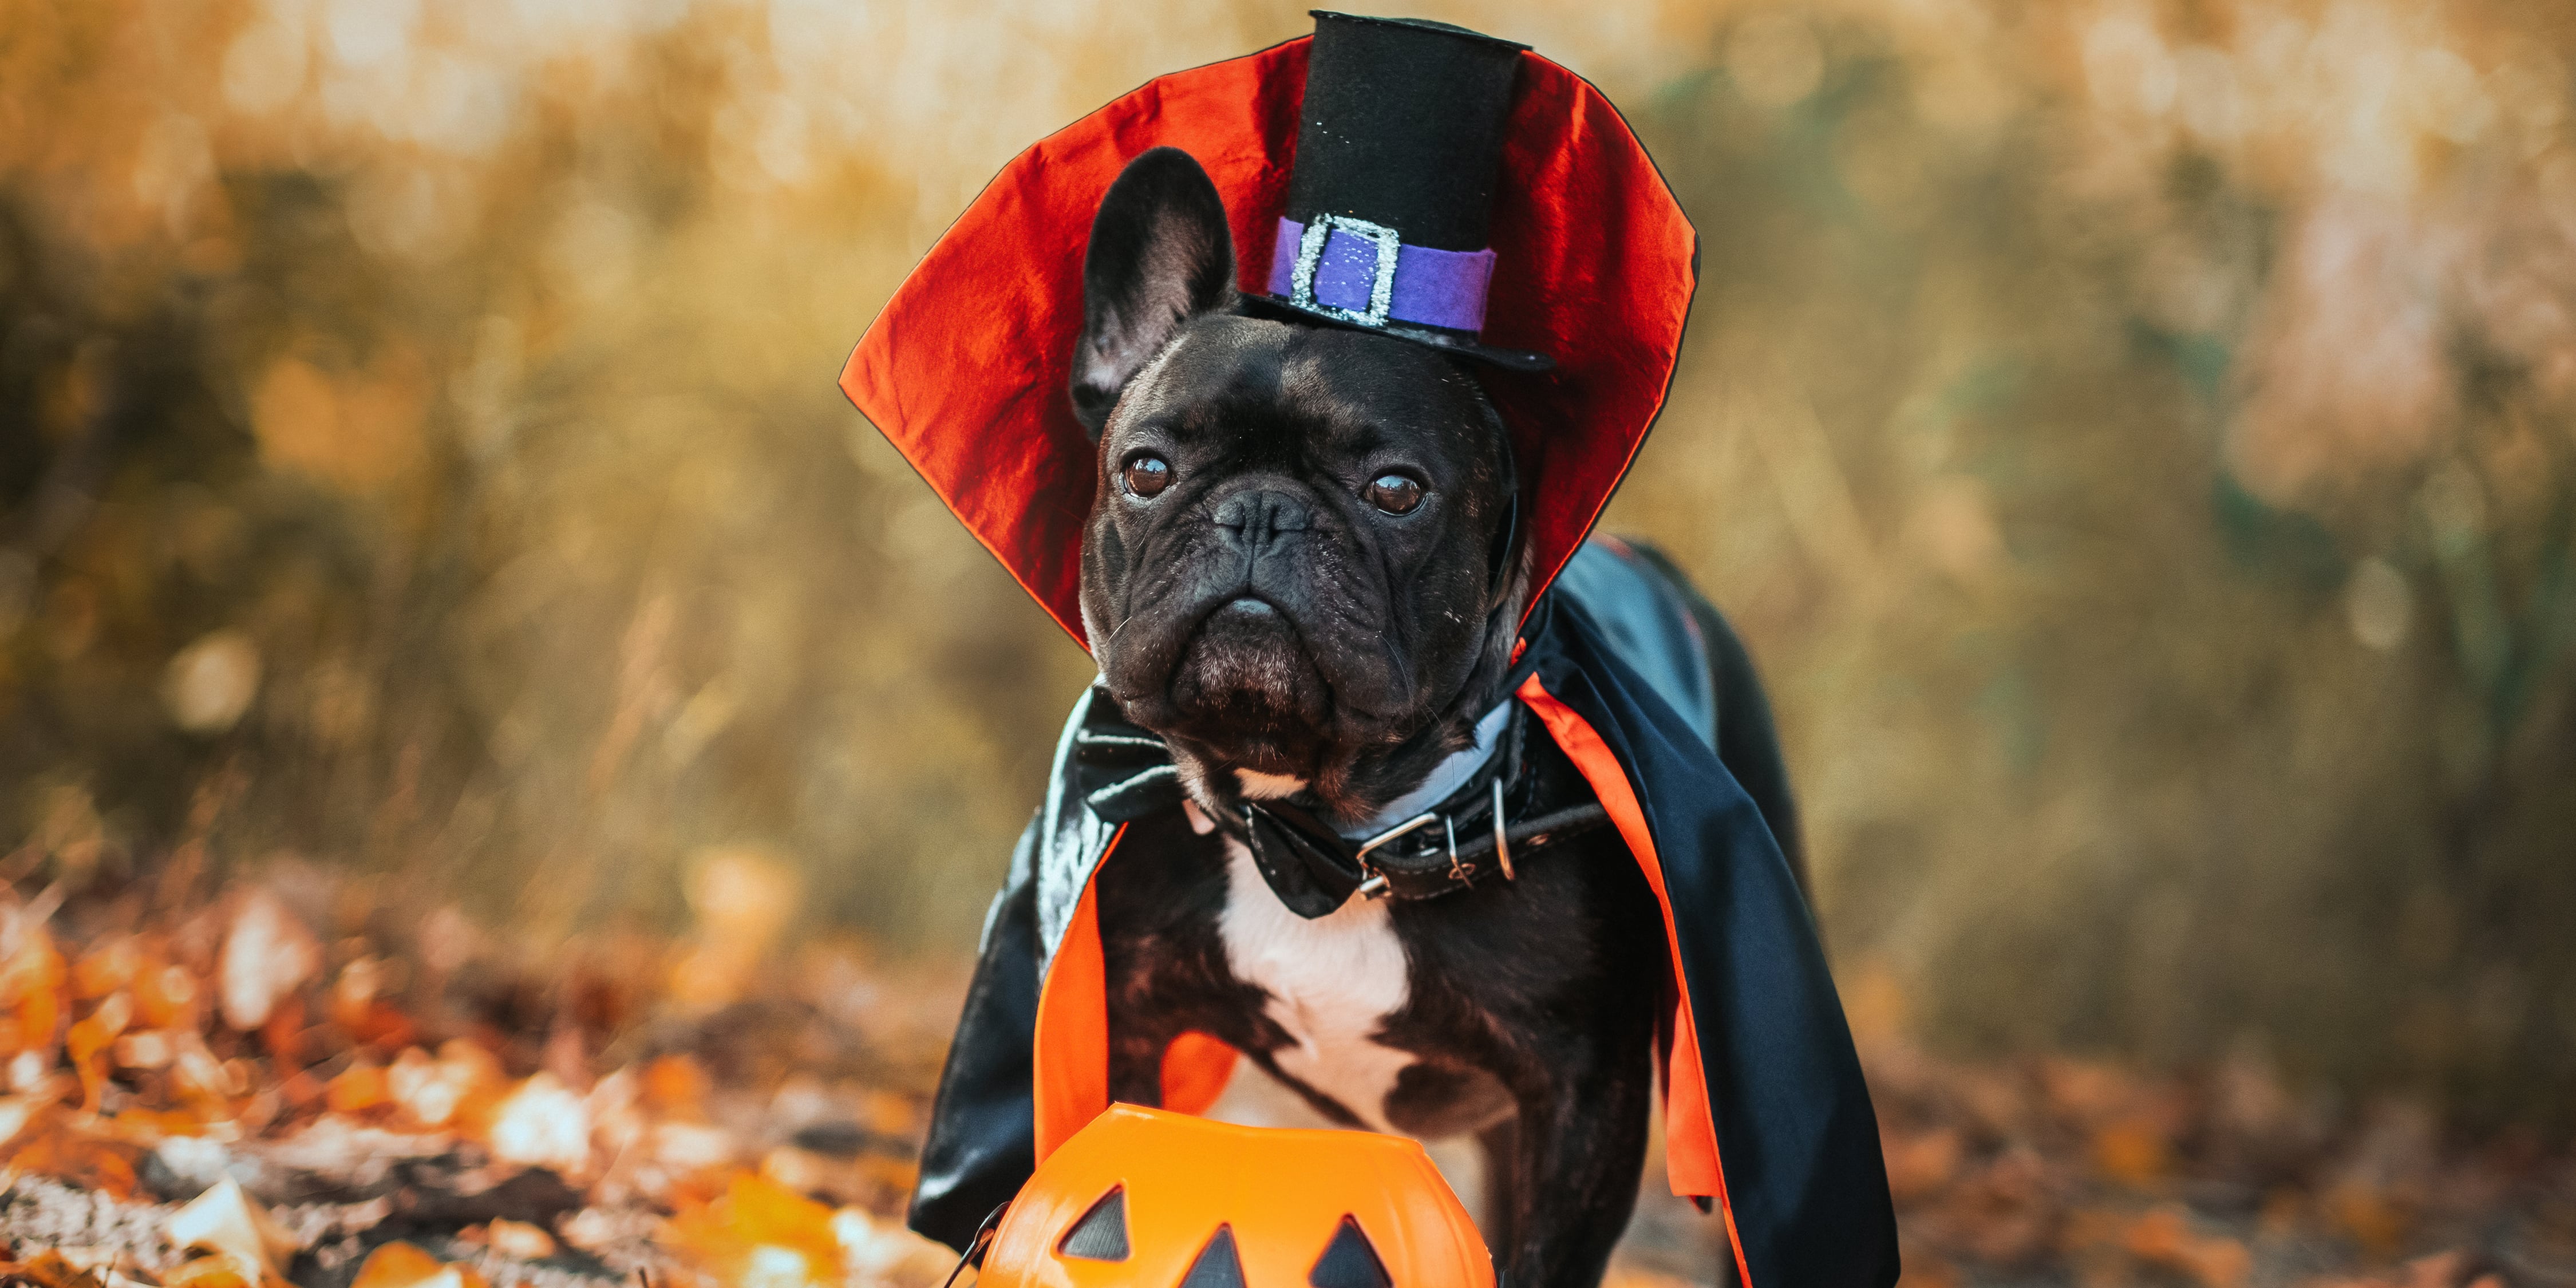 24 Best Matching Dog and Owner Halloween Costume Ideas for 2022